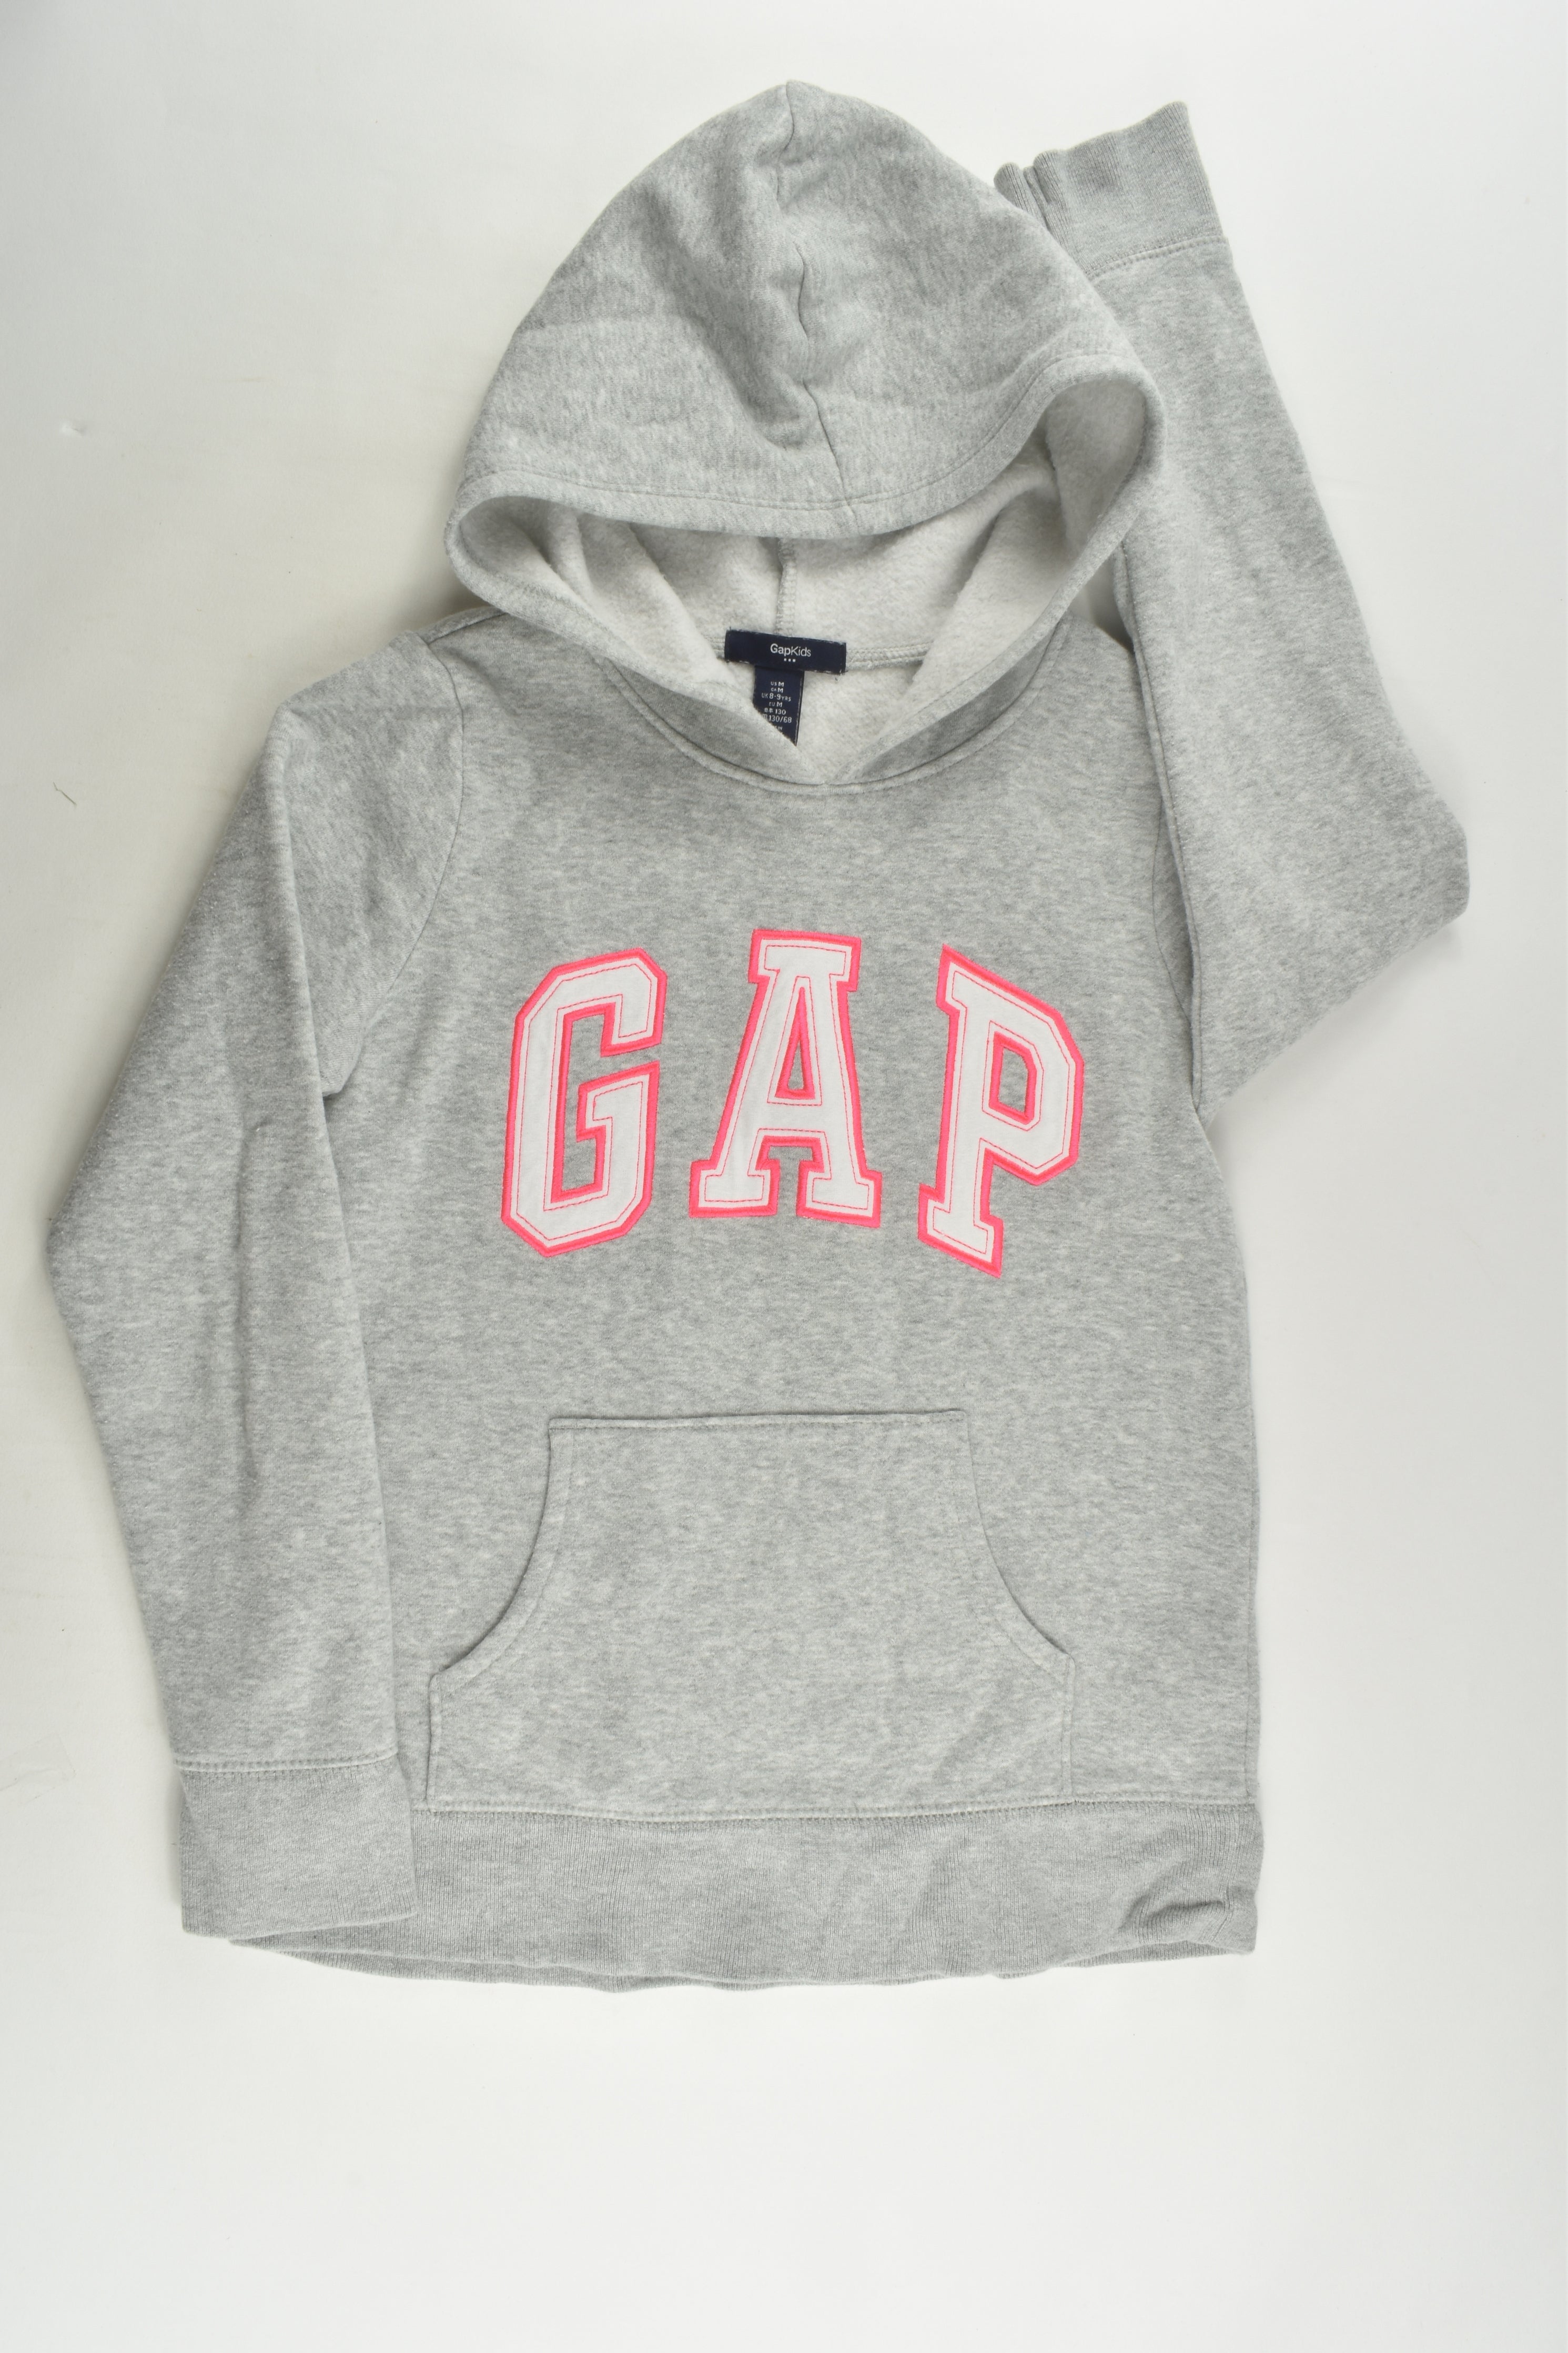 Gap Kids Size 8-9 Jumper – MiniMe Preloved Baby and Kids' Clothes